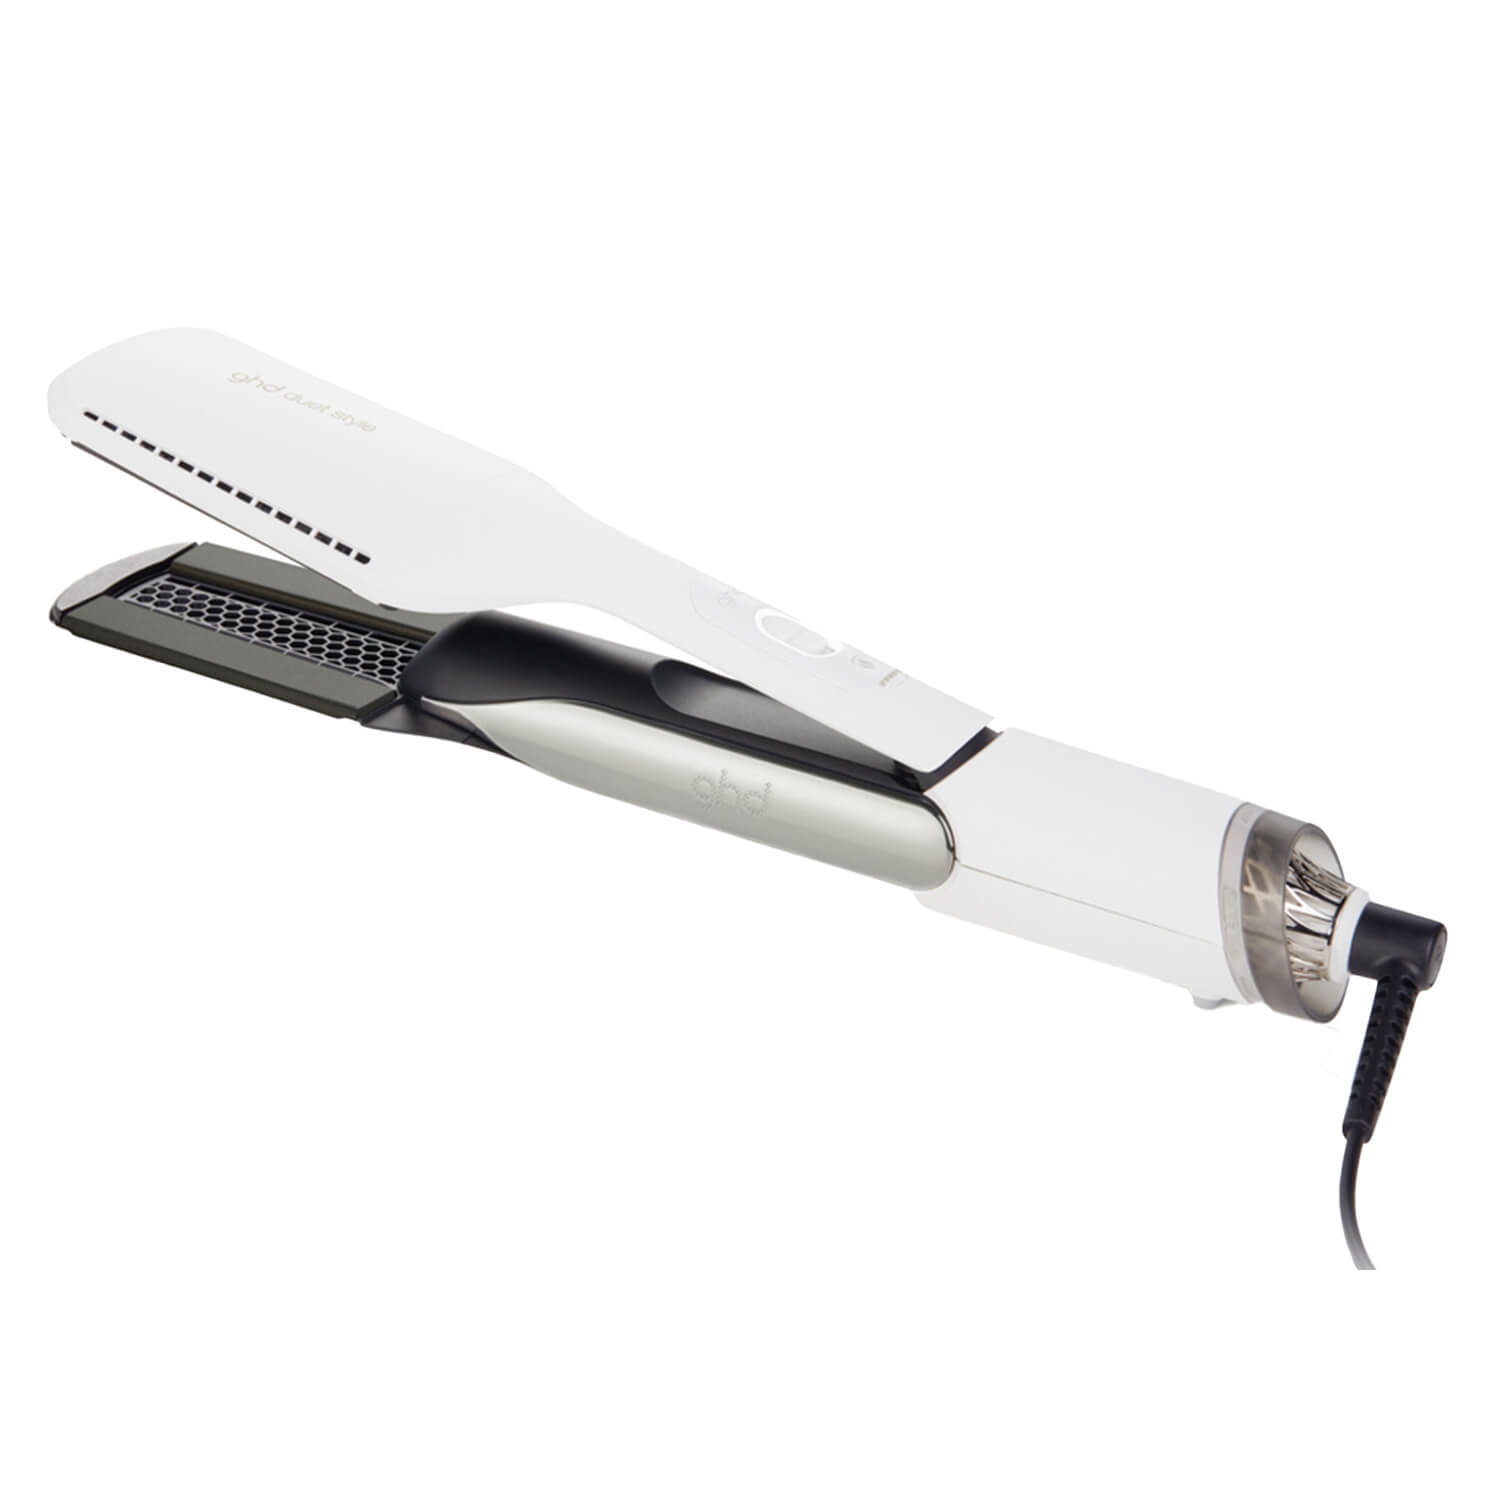 Product image from ghd Tools - ghd Duet Style Hot Air Styler White